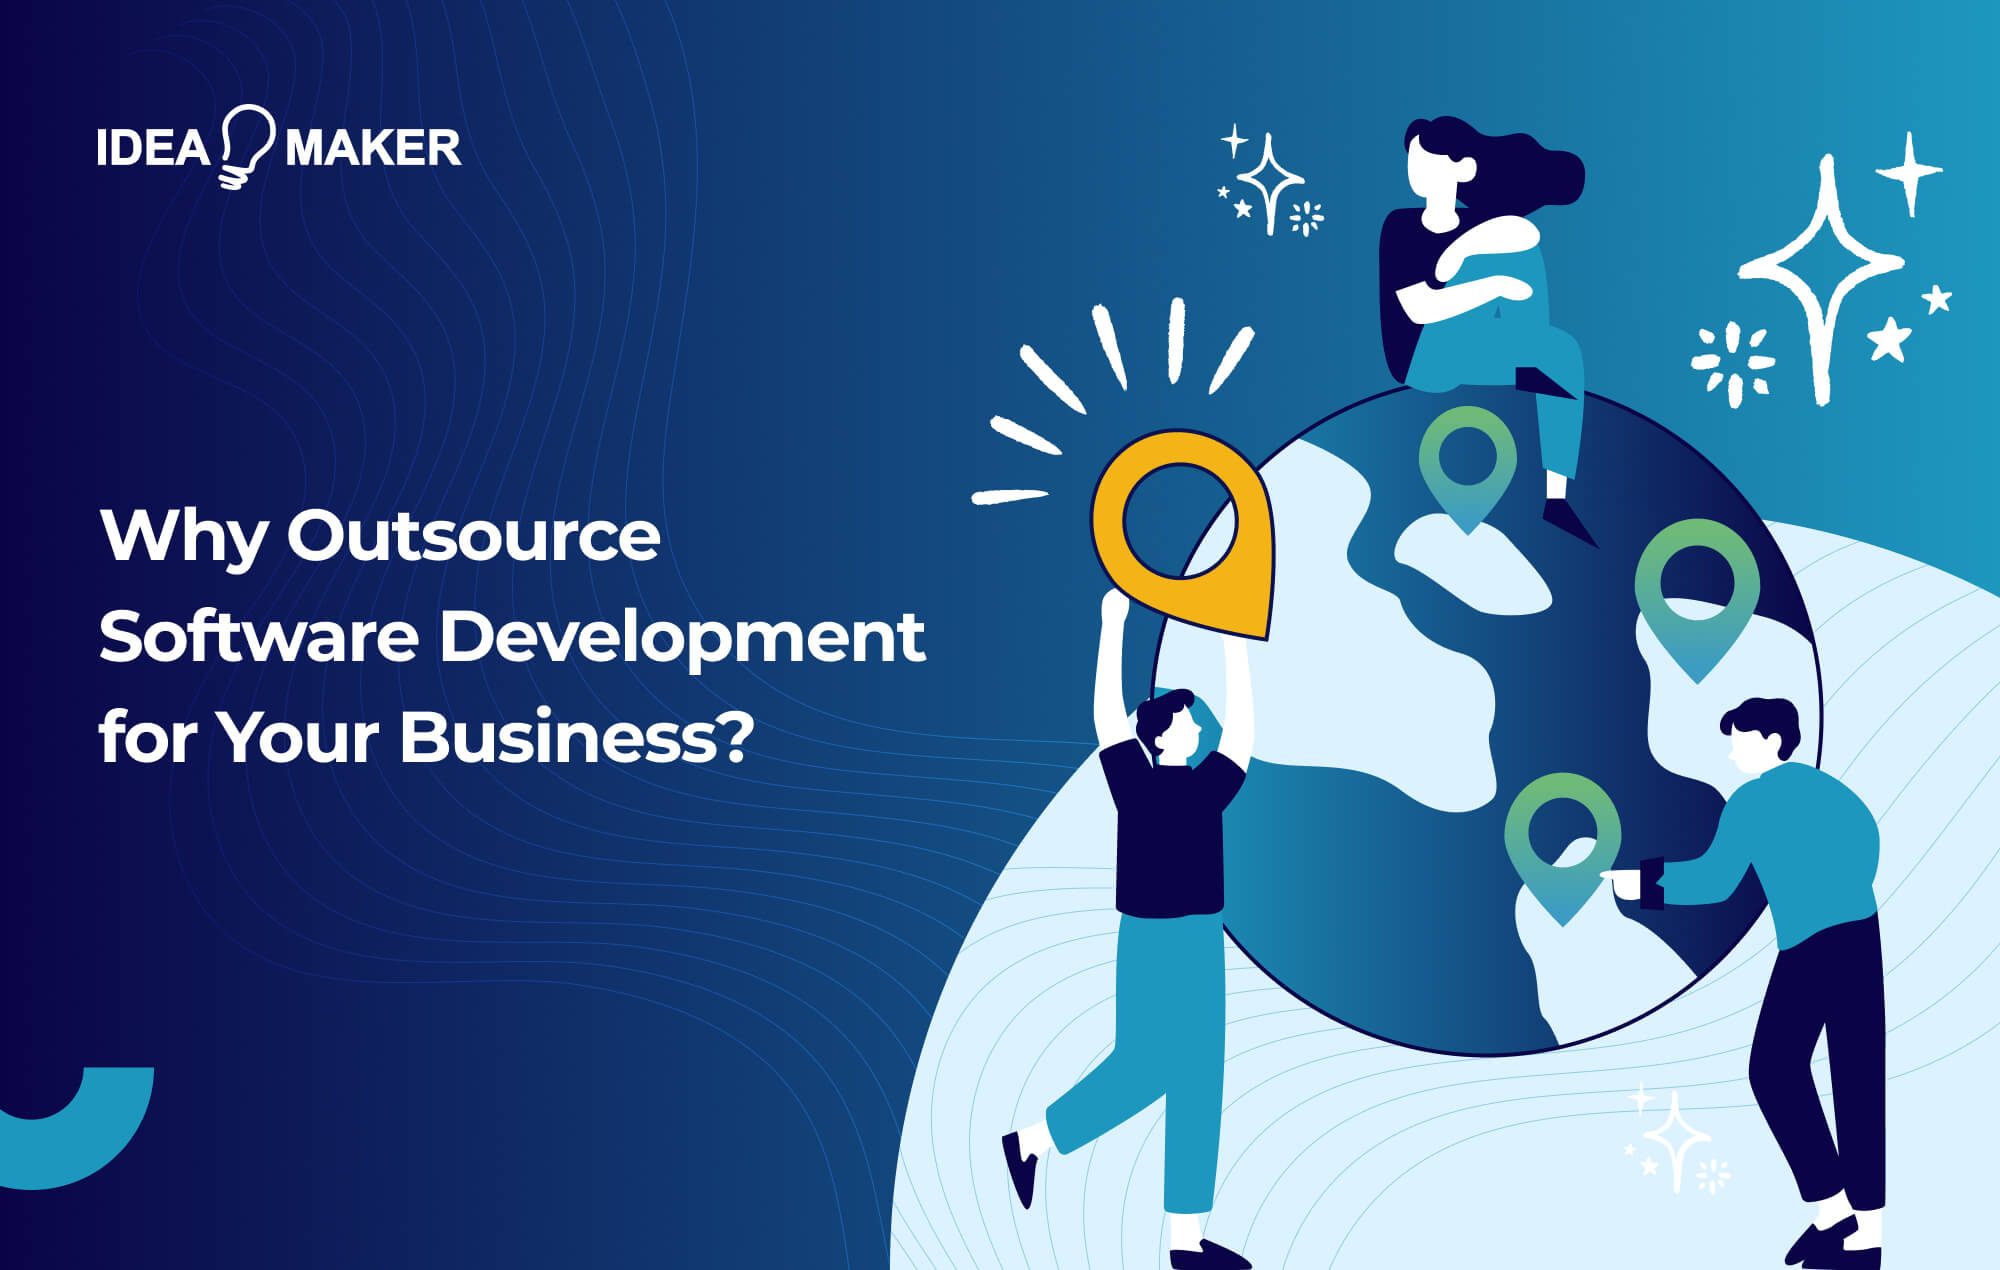 Why Outsource Software Development for Your Business?